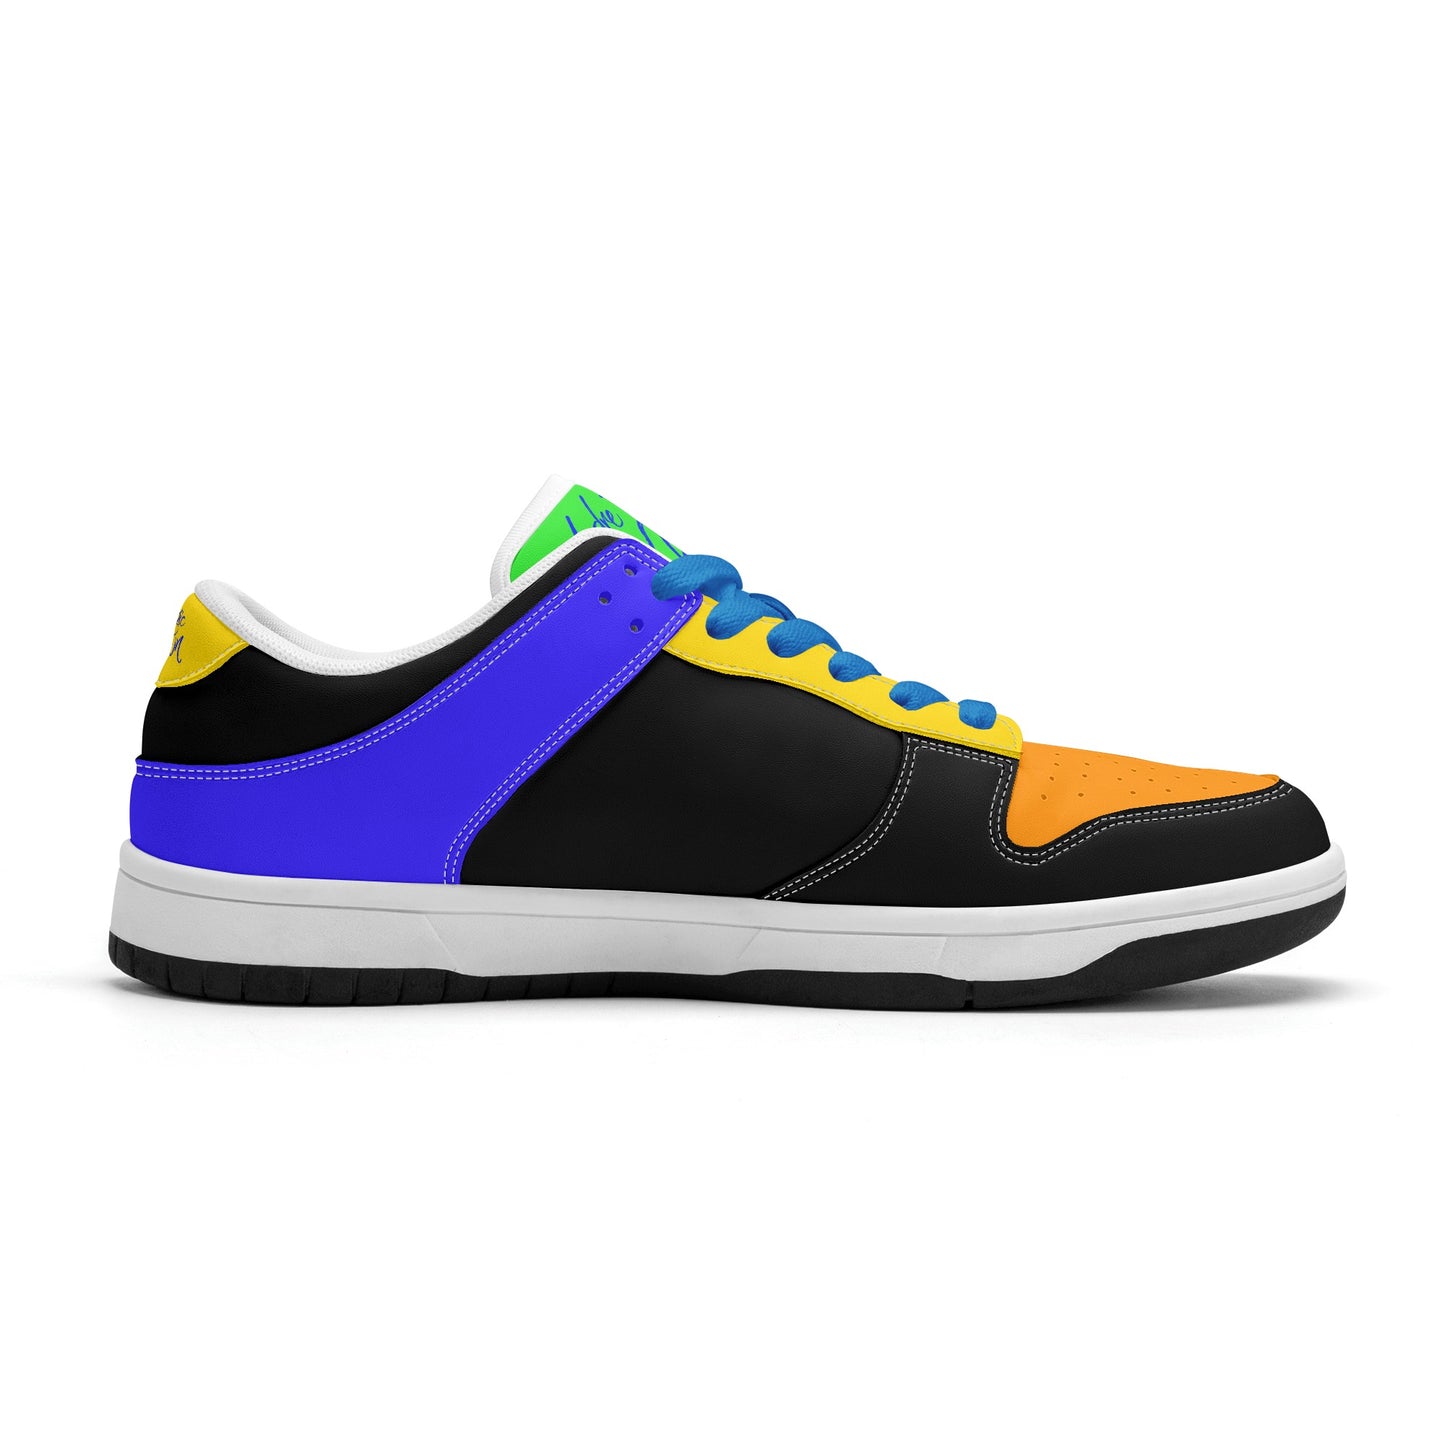 DJMD Mens Stylish Low Top Leather Sneakers